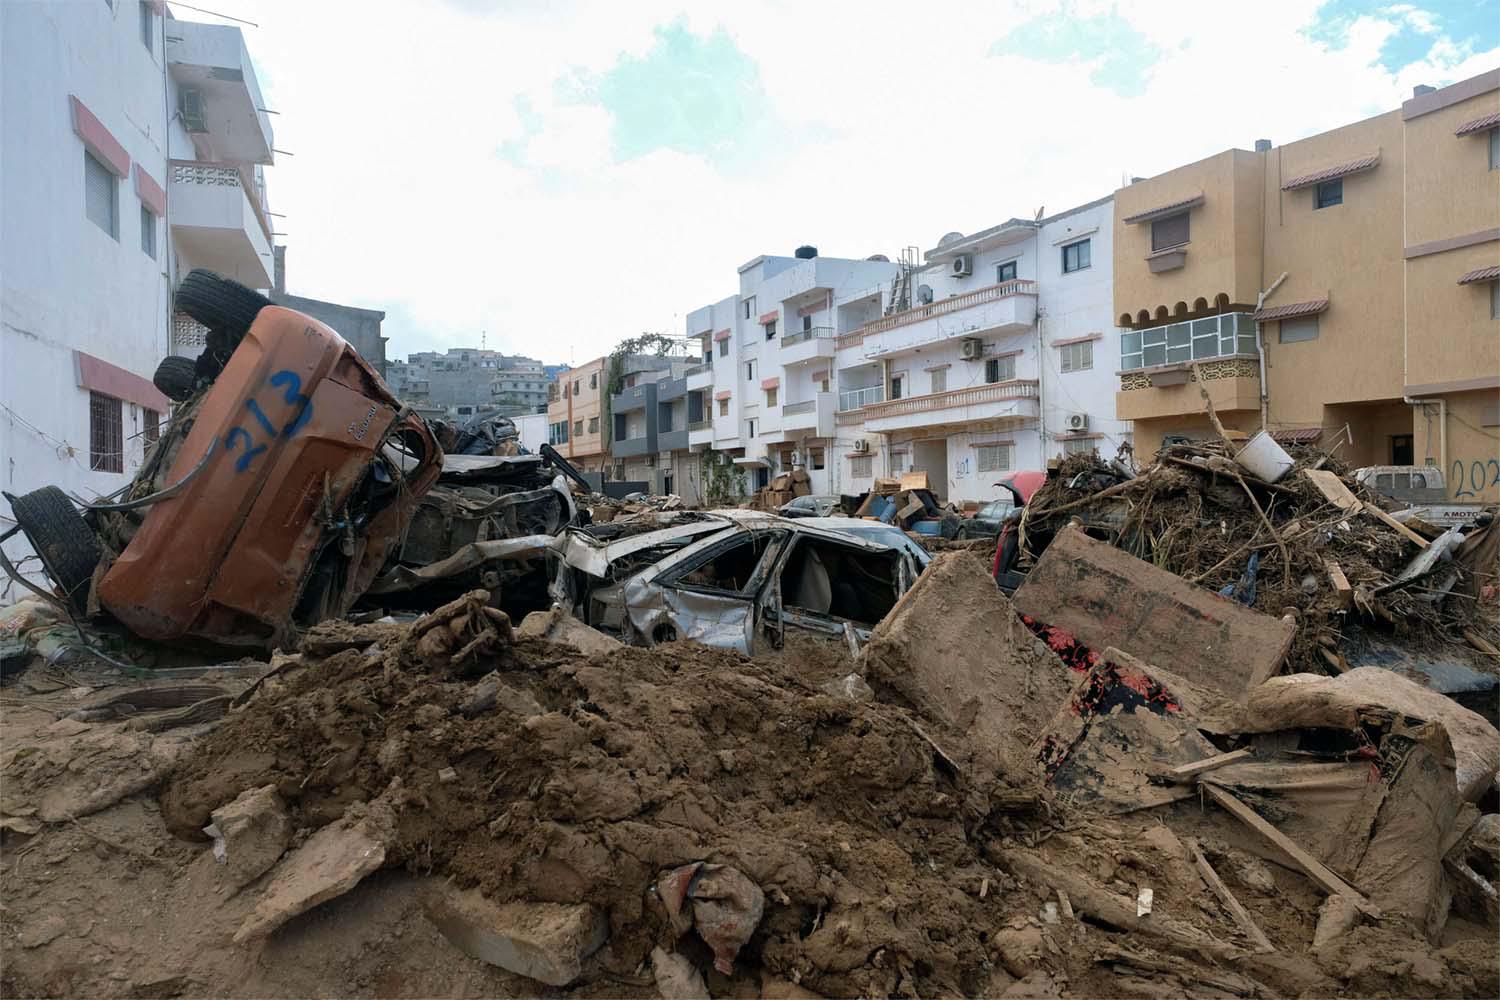 Huge swathes of the city of Derna were destroyed in the flood